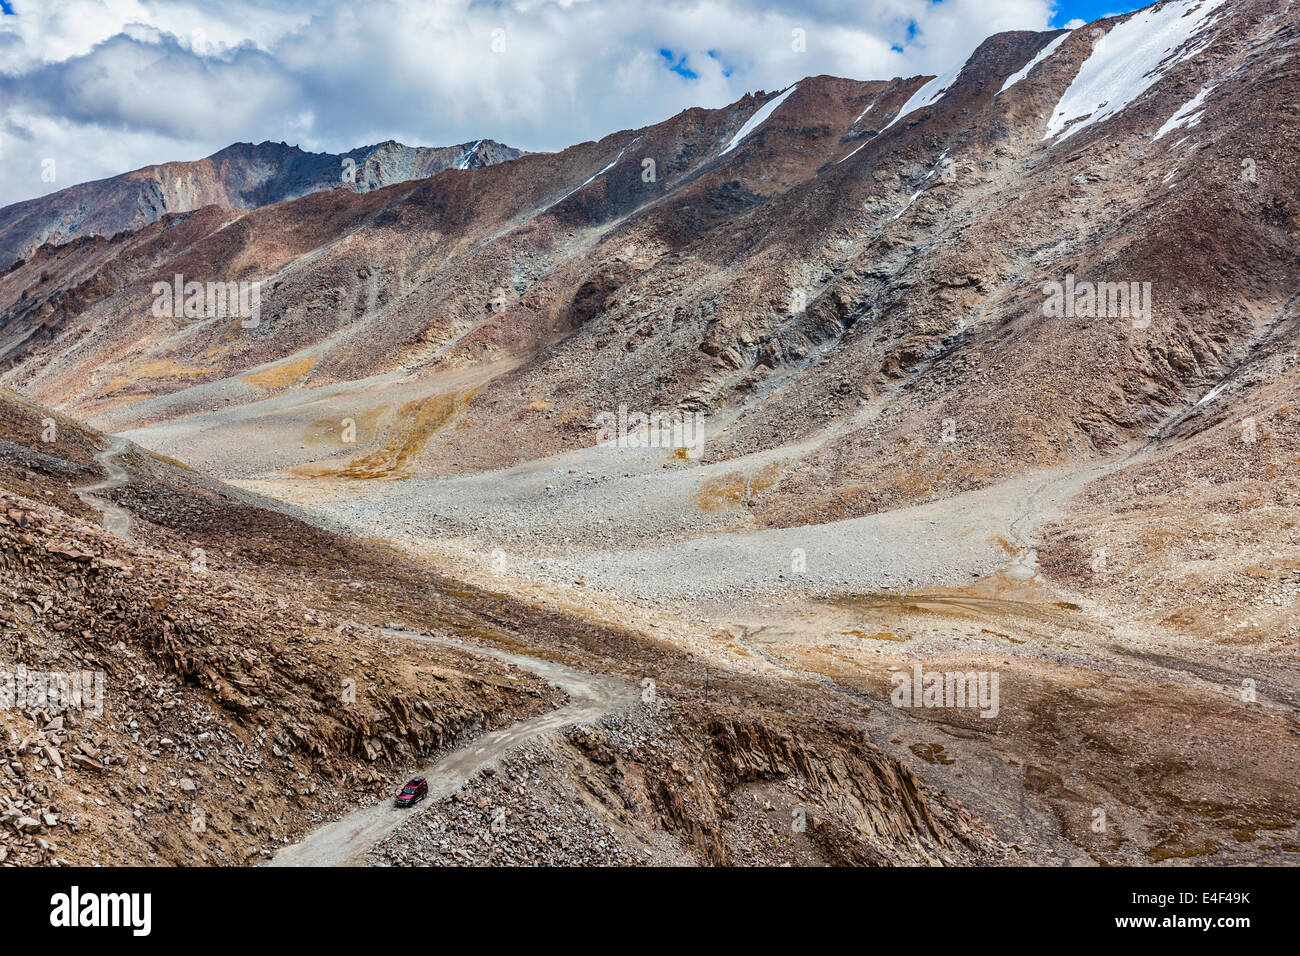 Himalayan valley landscape with road near Kunzum La pass - allegedly the highest motorable pass in the world (5602 m), Ladakh Stock Photo